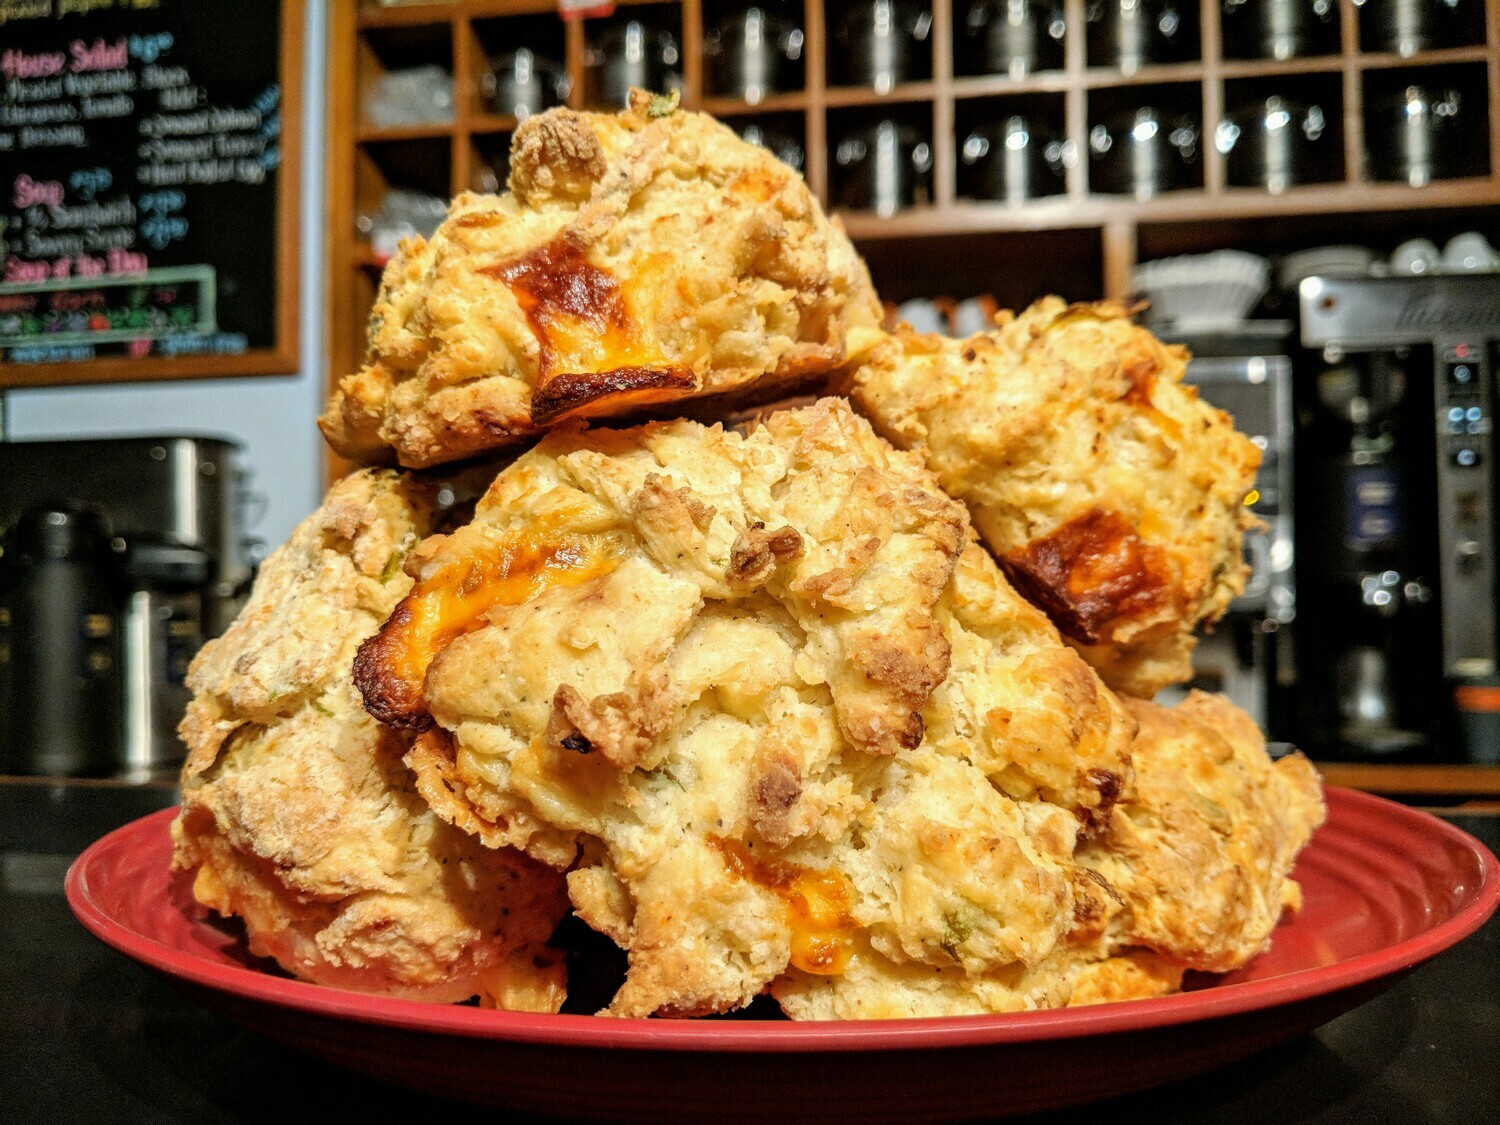 Savory Scone of the Day - Minimum Order of 4